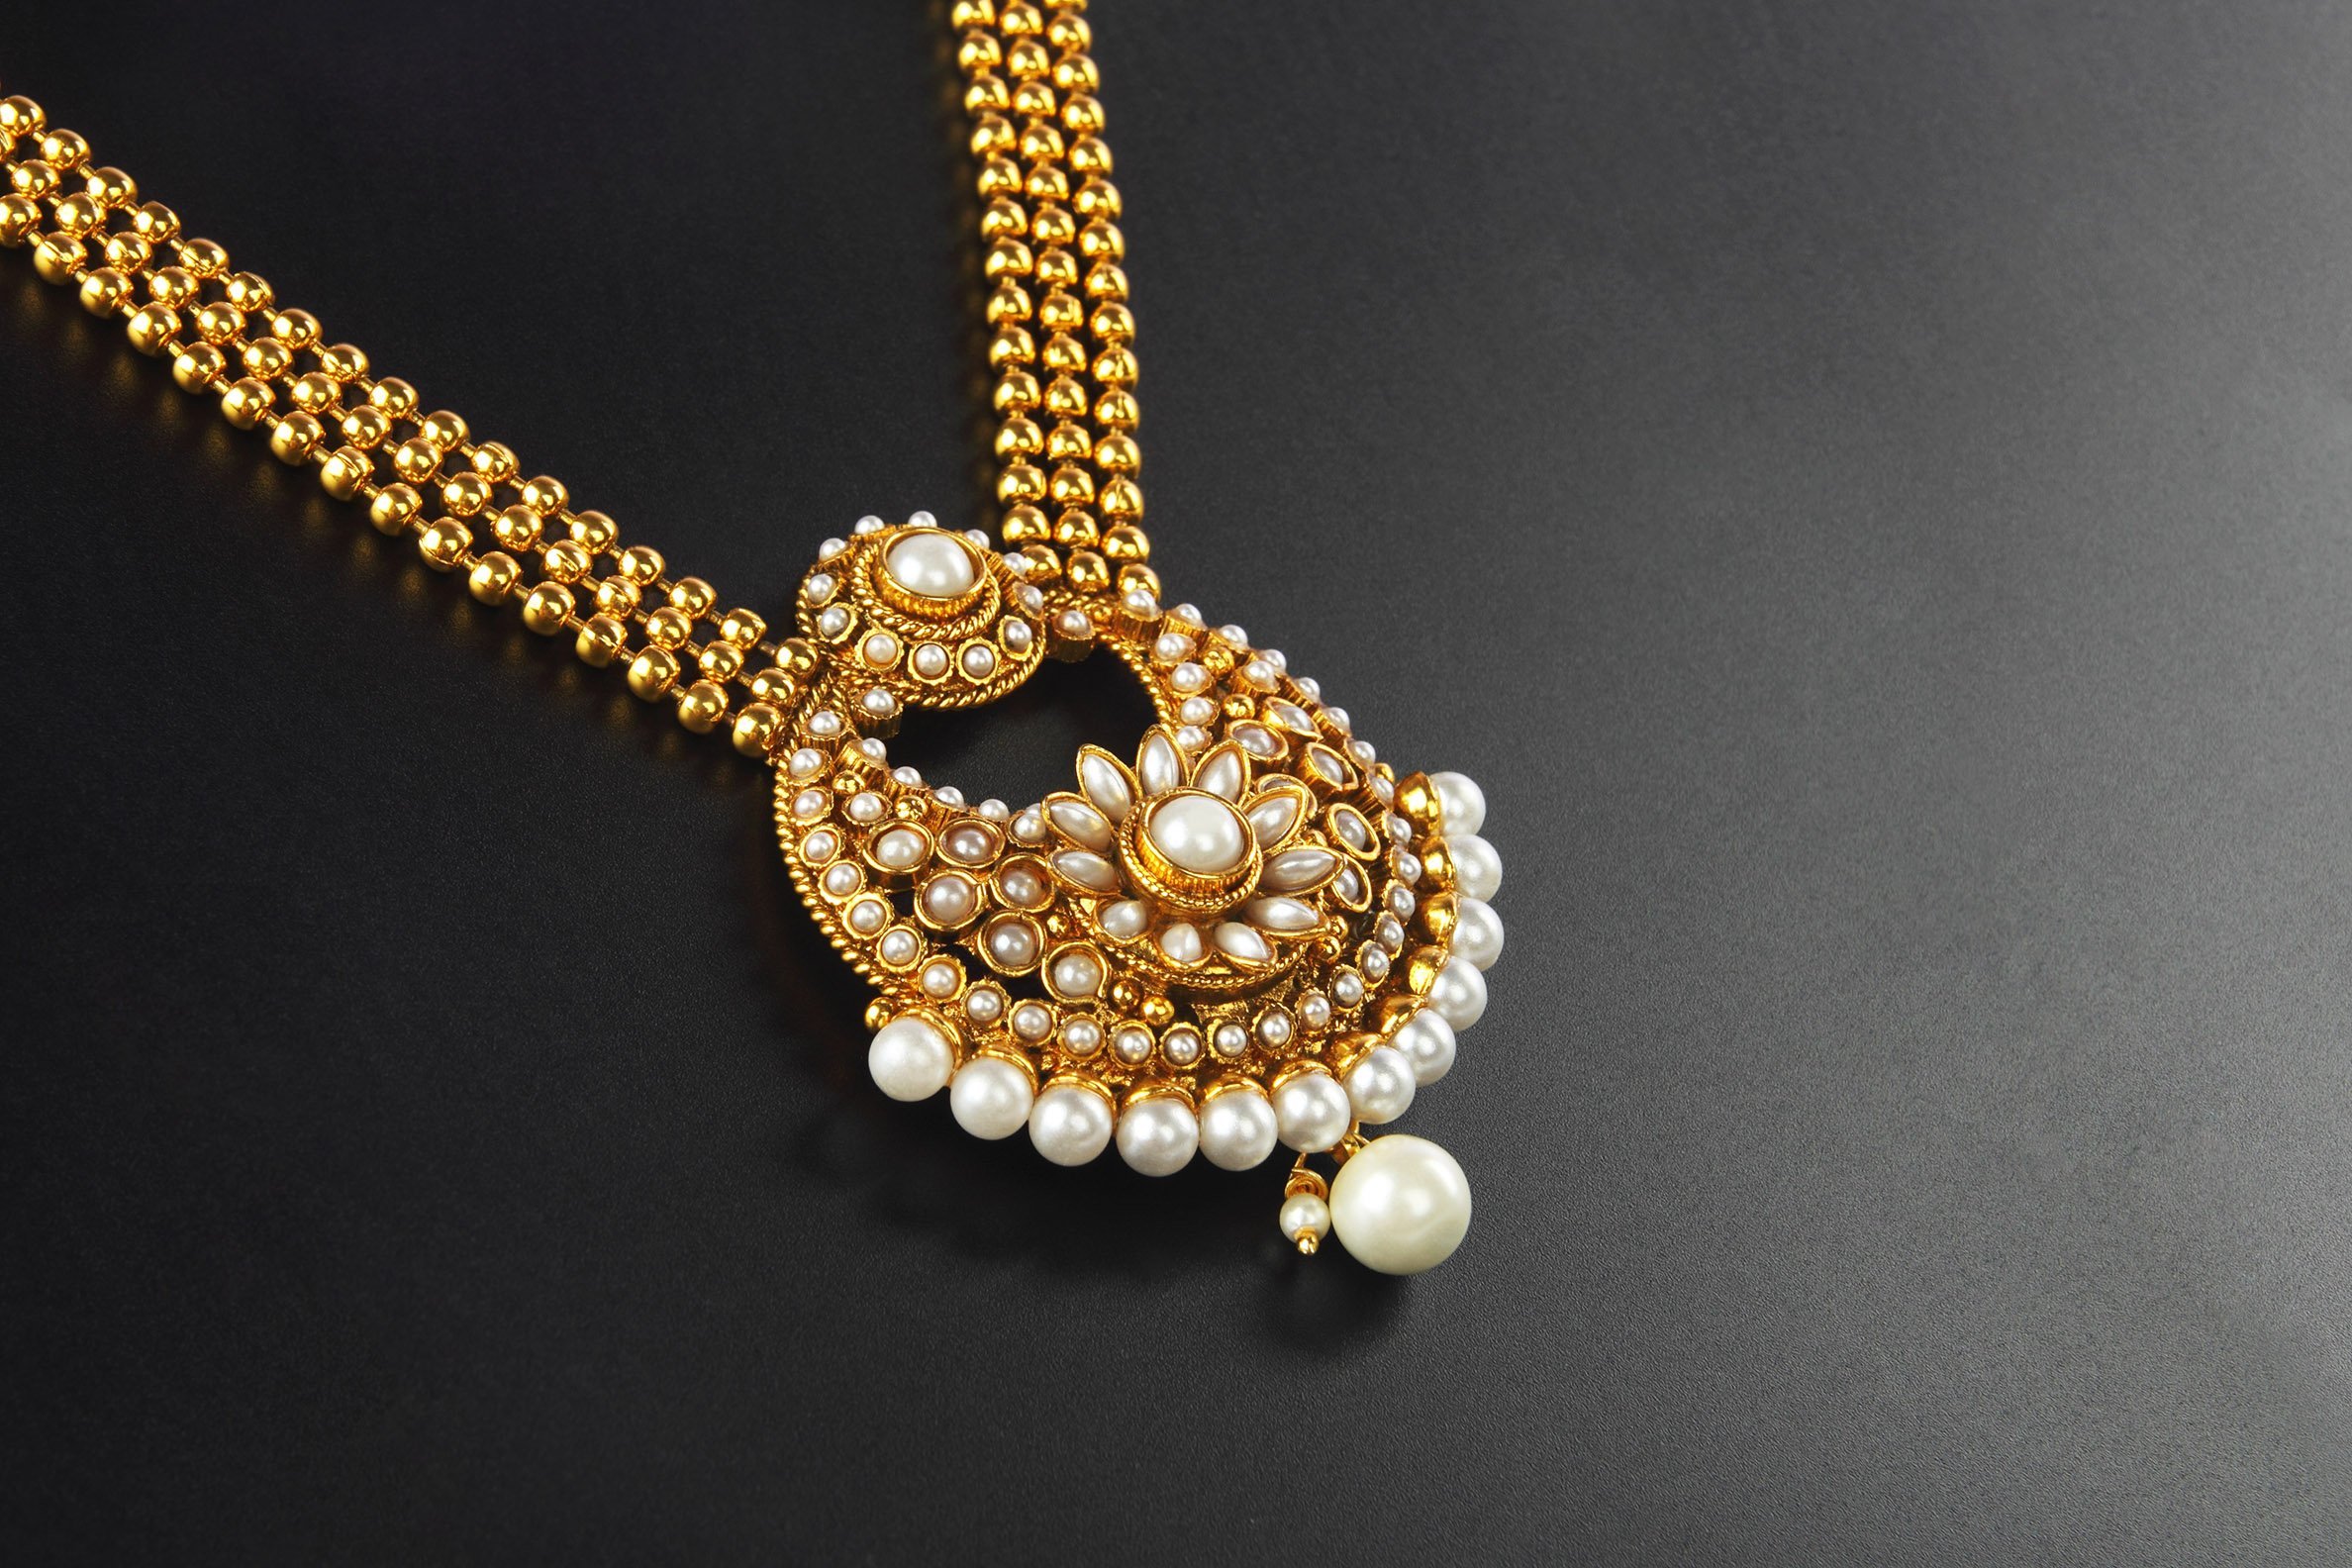 Gold Necklace without Pendant Considerations